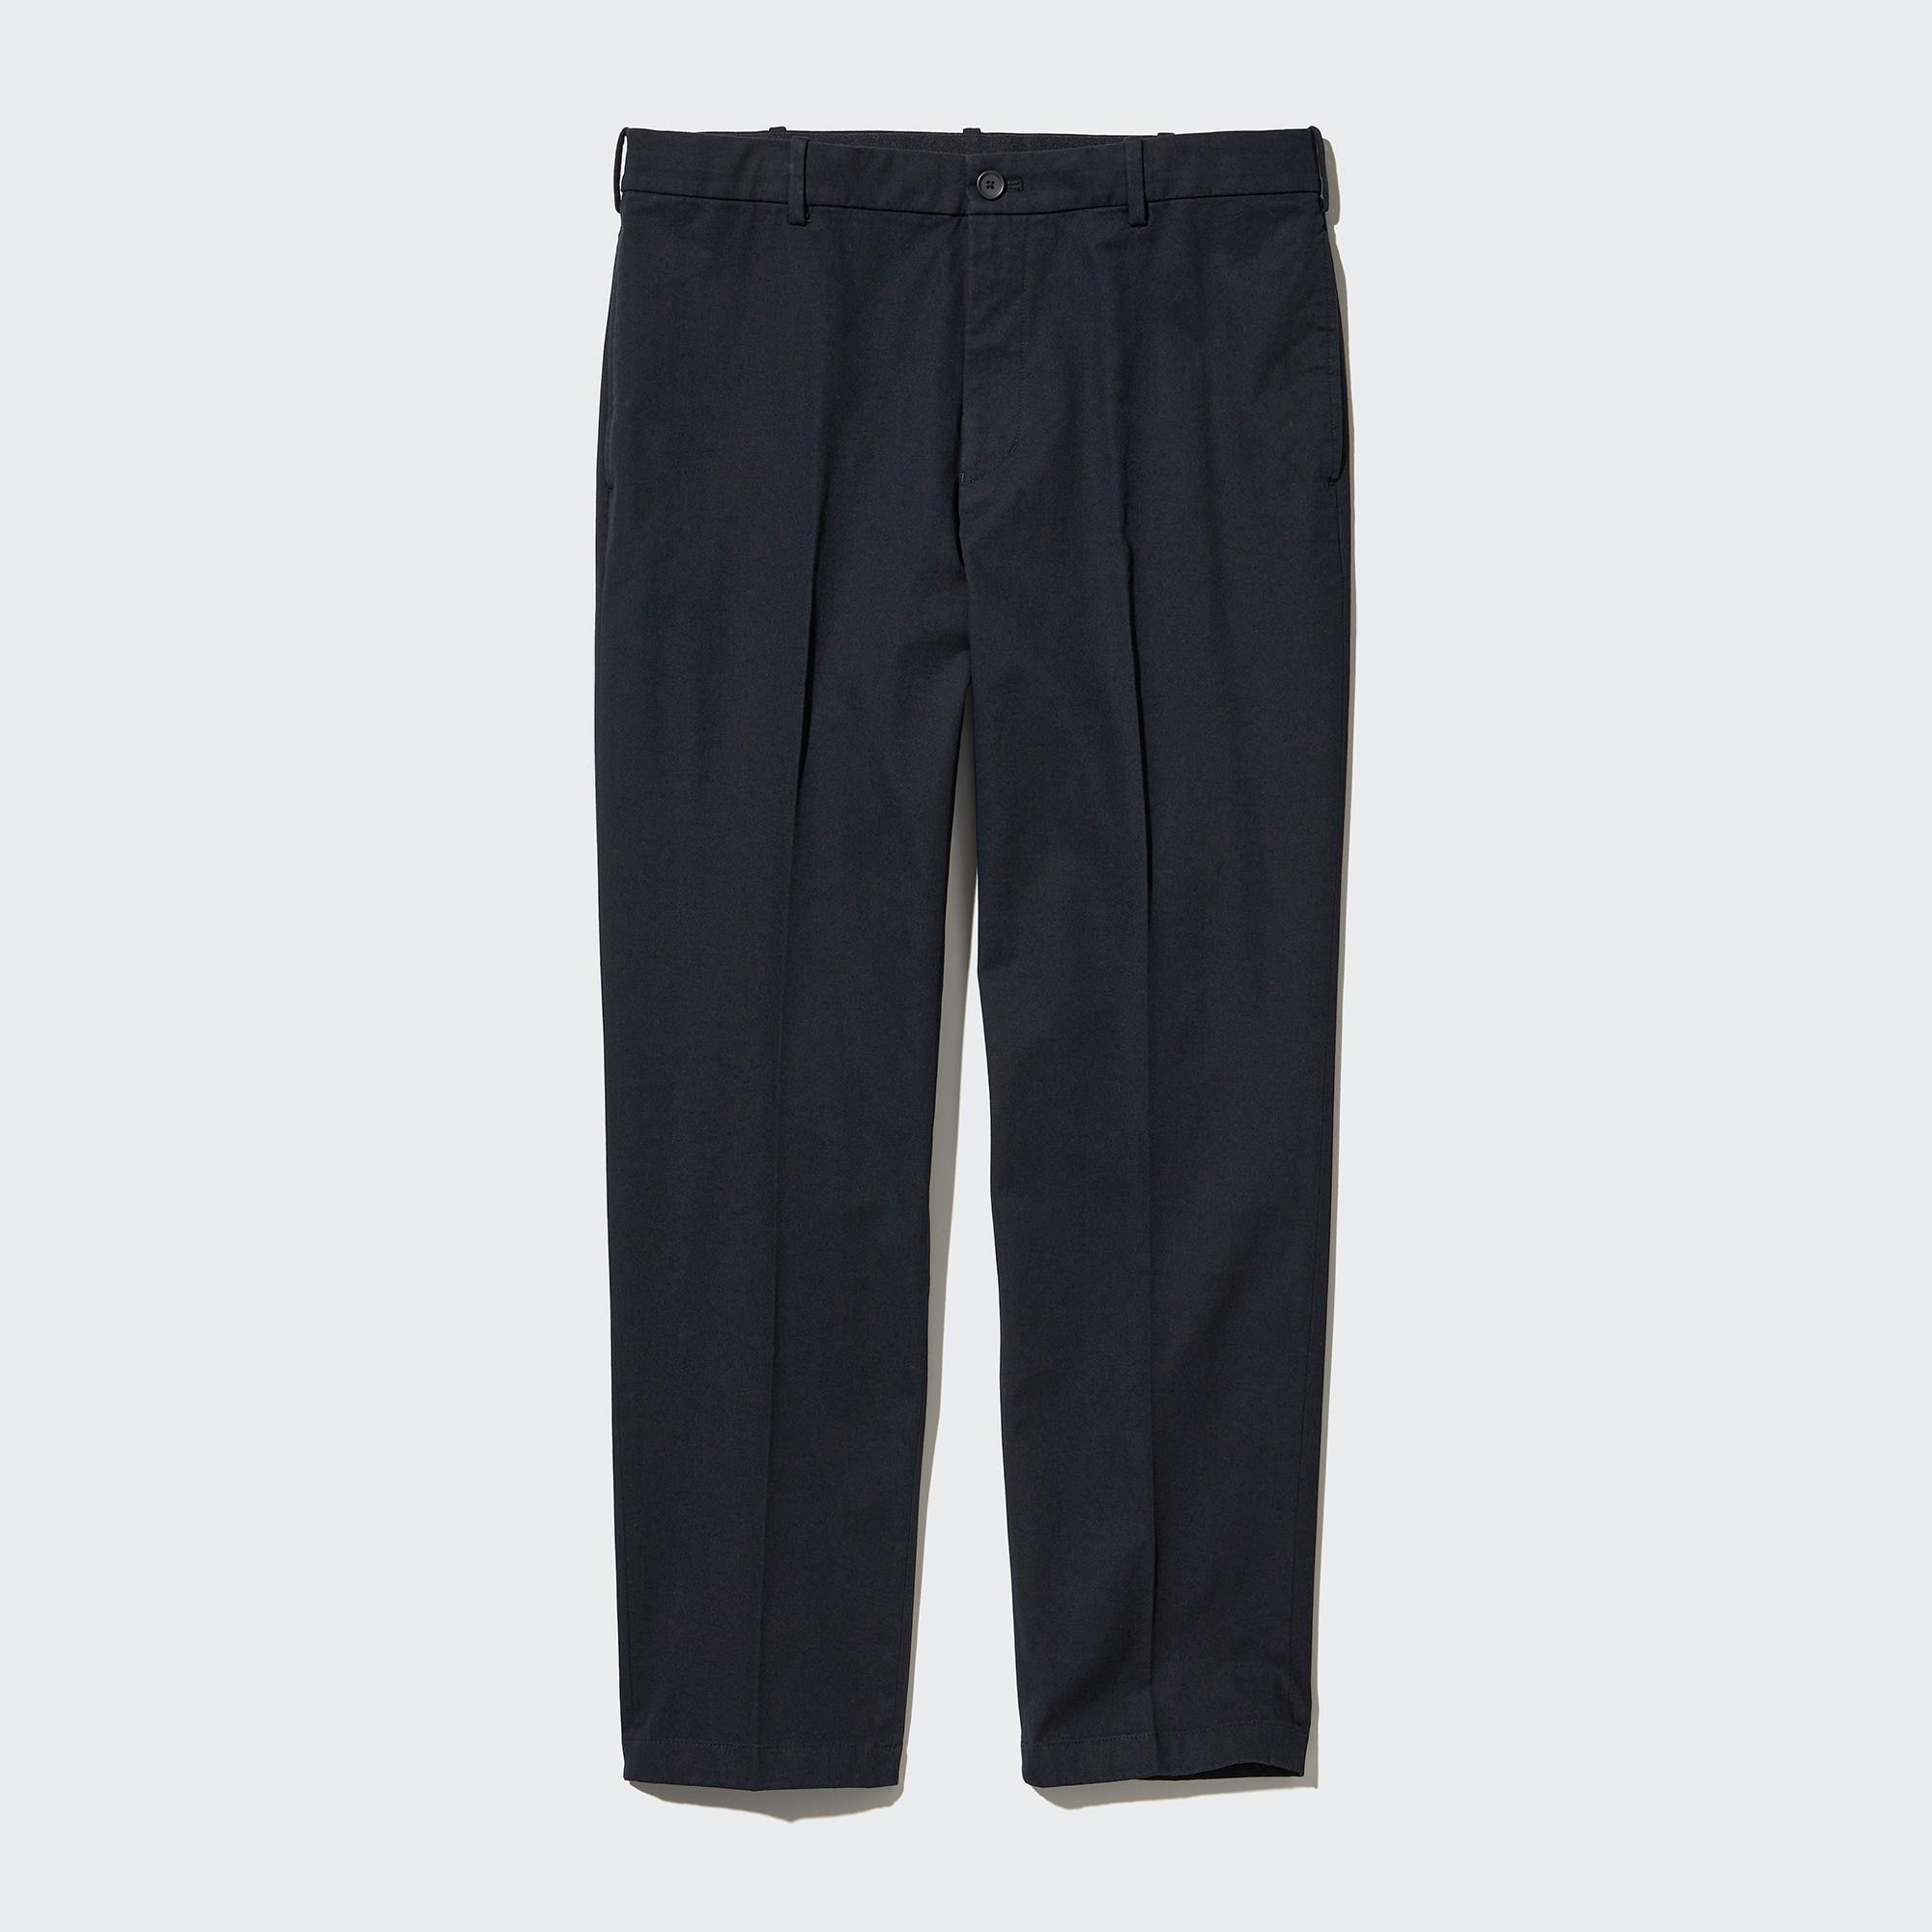 Smart Cotton Ankle Length Trousers (Long) | UNIQLO GB